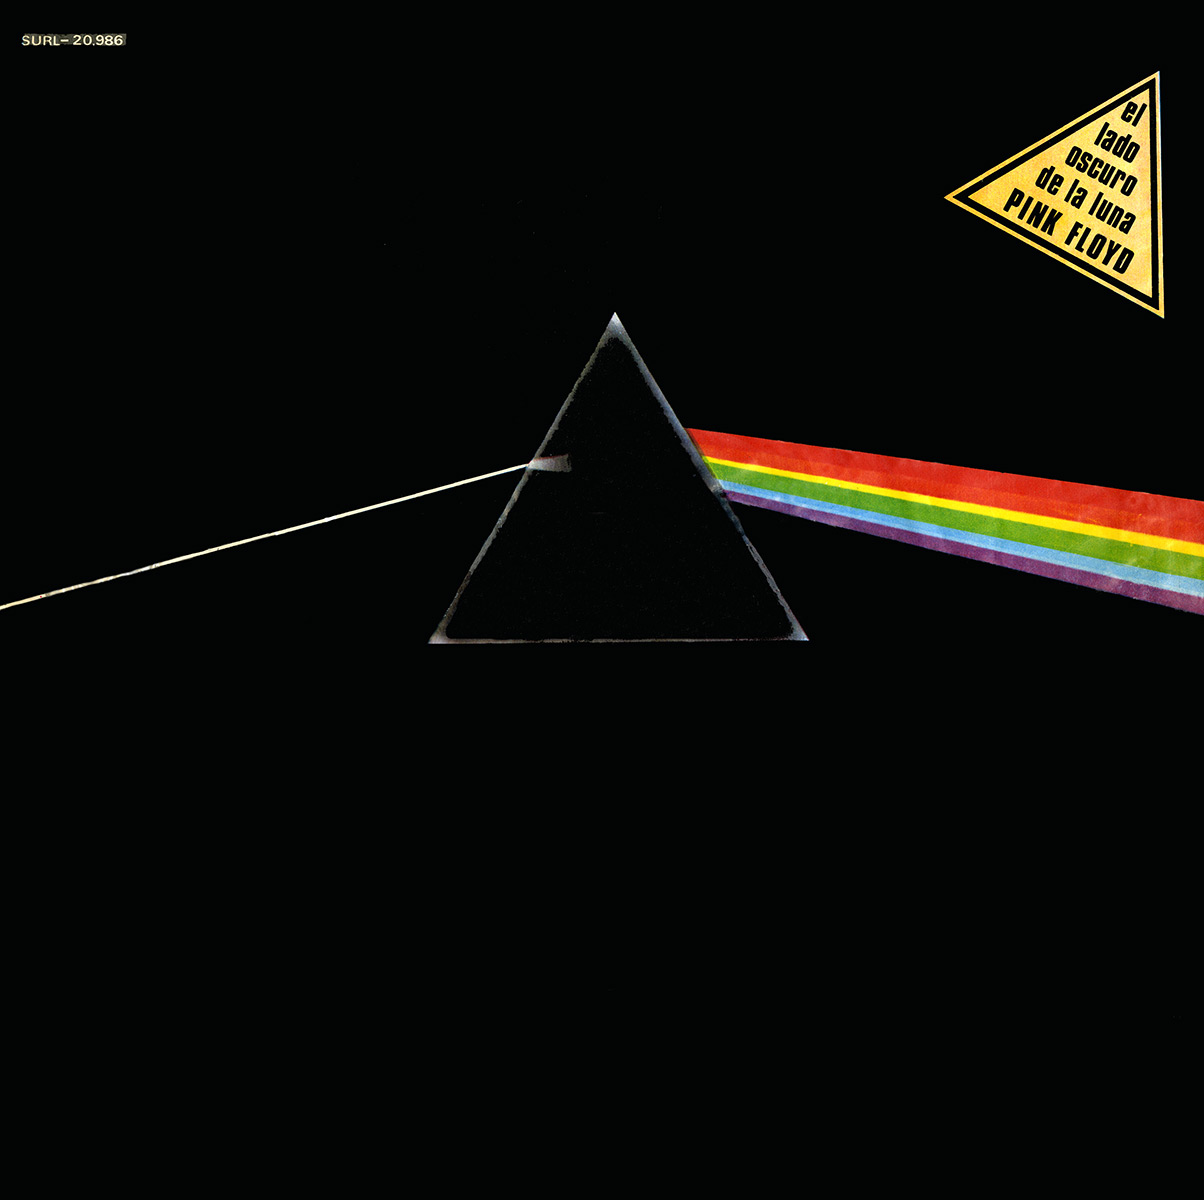 Pink Floyd Discography at Discogs